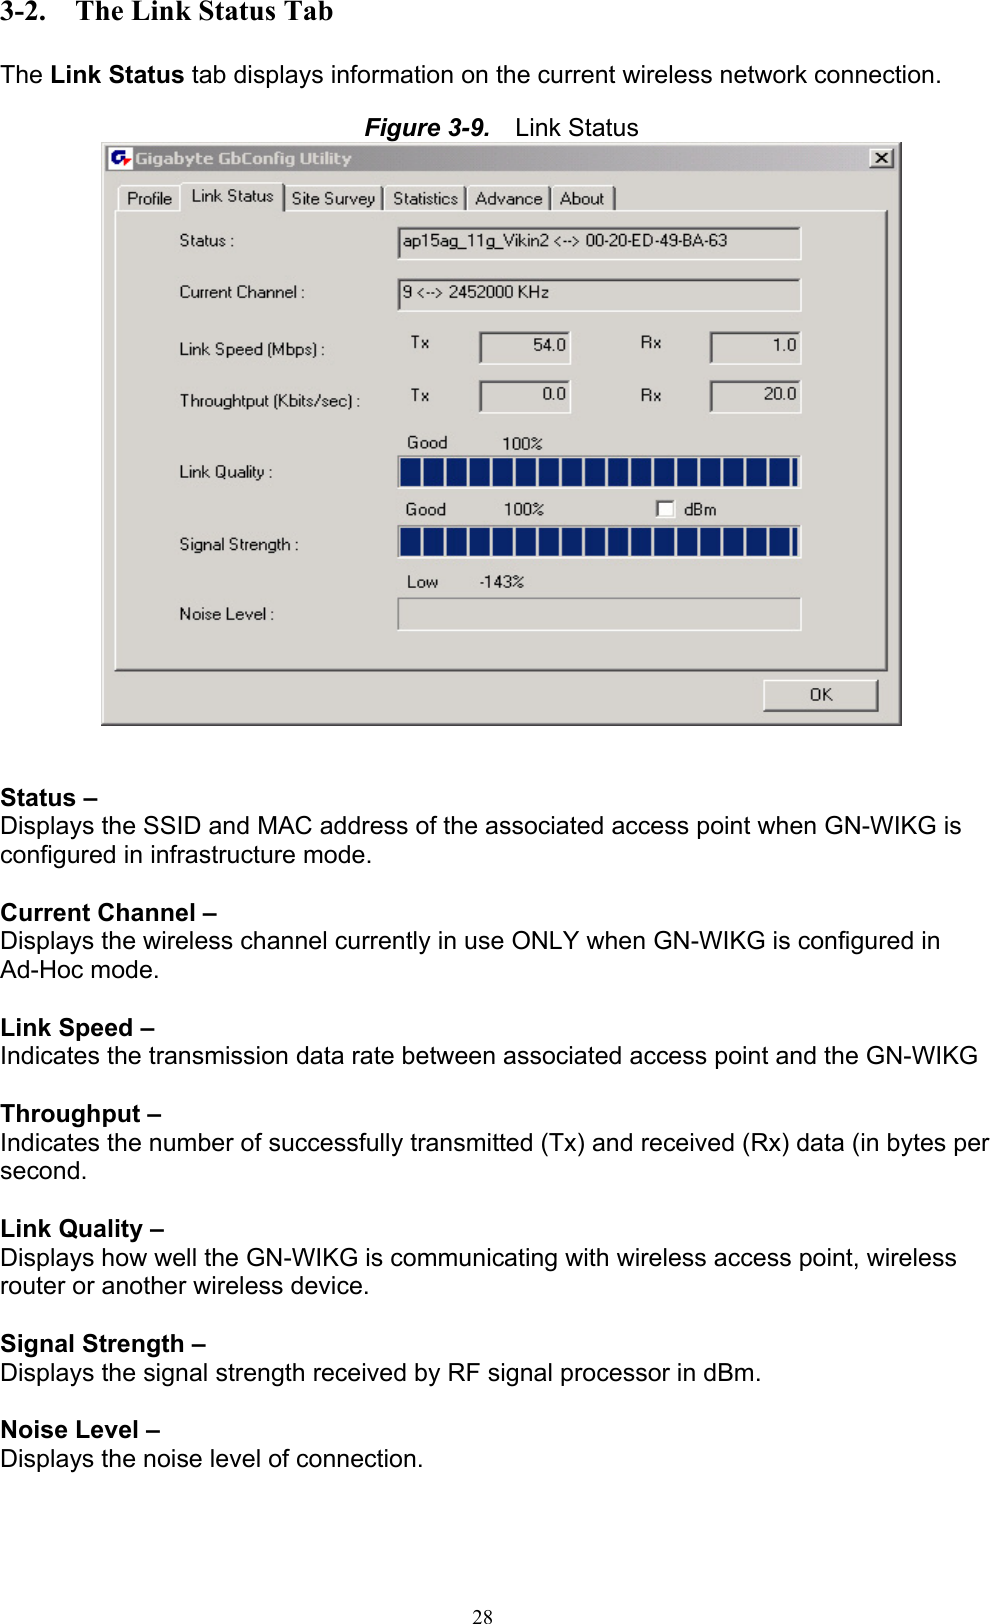 28  3-2.  The Link Status Tab  The Link Status tab displays information on the current wireless network connection.  Figure 3-9.   Link Status    Status –   Displays the SSID and MAC address of the associated access point when GN-WIKG is configured in infrastructure mode.  Current Channel – Displays the wireless channel currently in use ONLY when GN-WIKG is configured in Ad-Hoc mode.  Link Speed –   Indicates the transmission data rate between associated access point and the GN-WIKG  Throughput –   Indicates the number of successfully transmitted (Tx) and received (Rx) data (in bytes per second.  Link Quality – Displays how well the GN-WIKG is communicating with wireless access point, wireless router or another wireless device.  Signal Strength –   Displays the signal strength received by RF signal processor in dBm.  Noise Level – Displays the noise level of connection.    